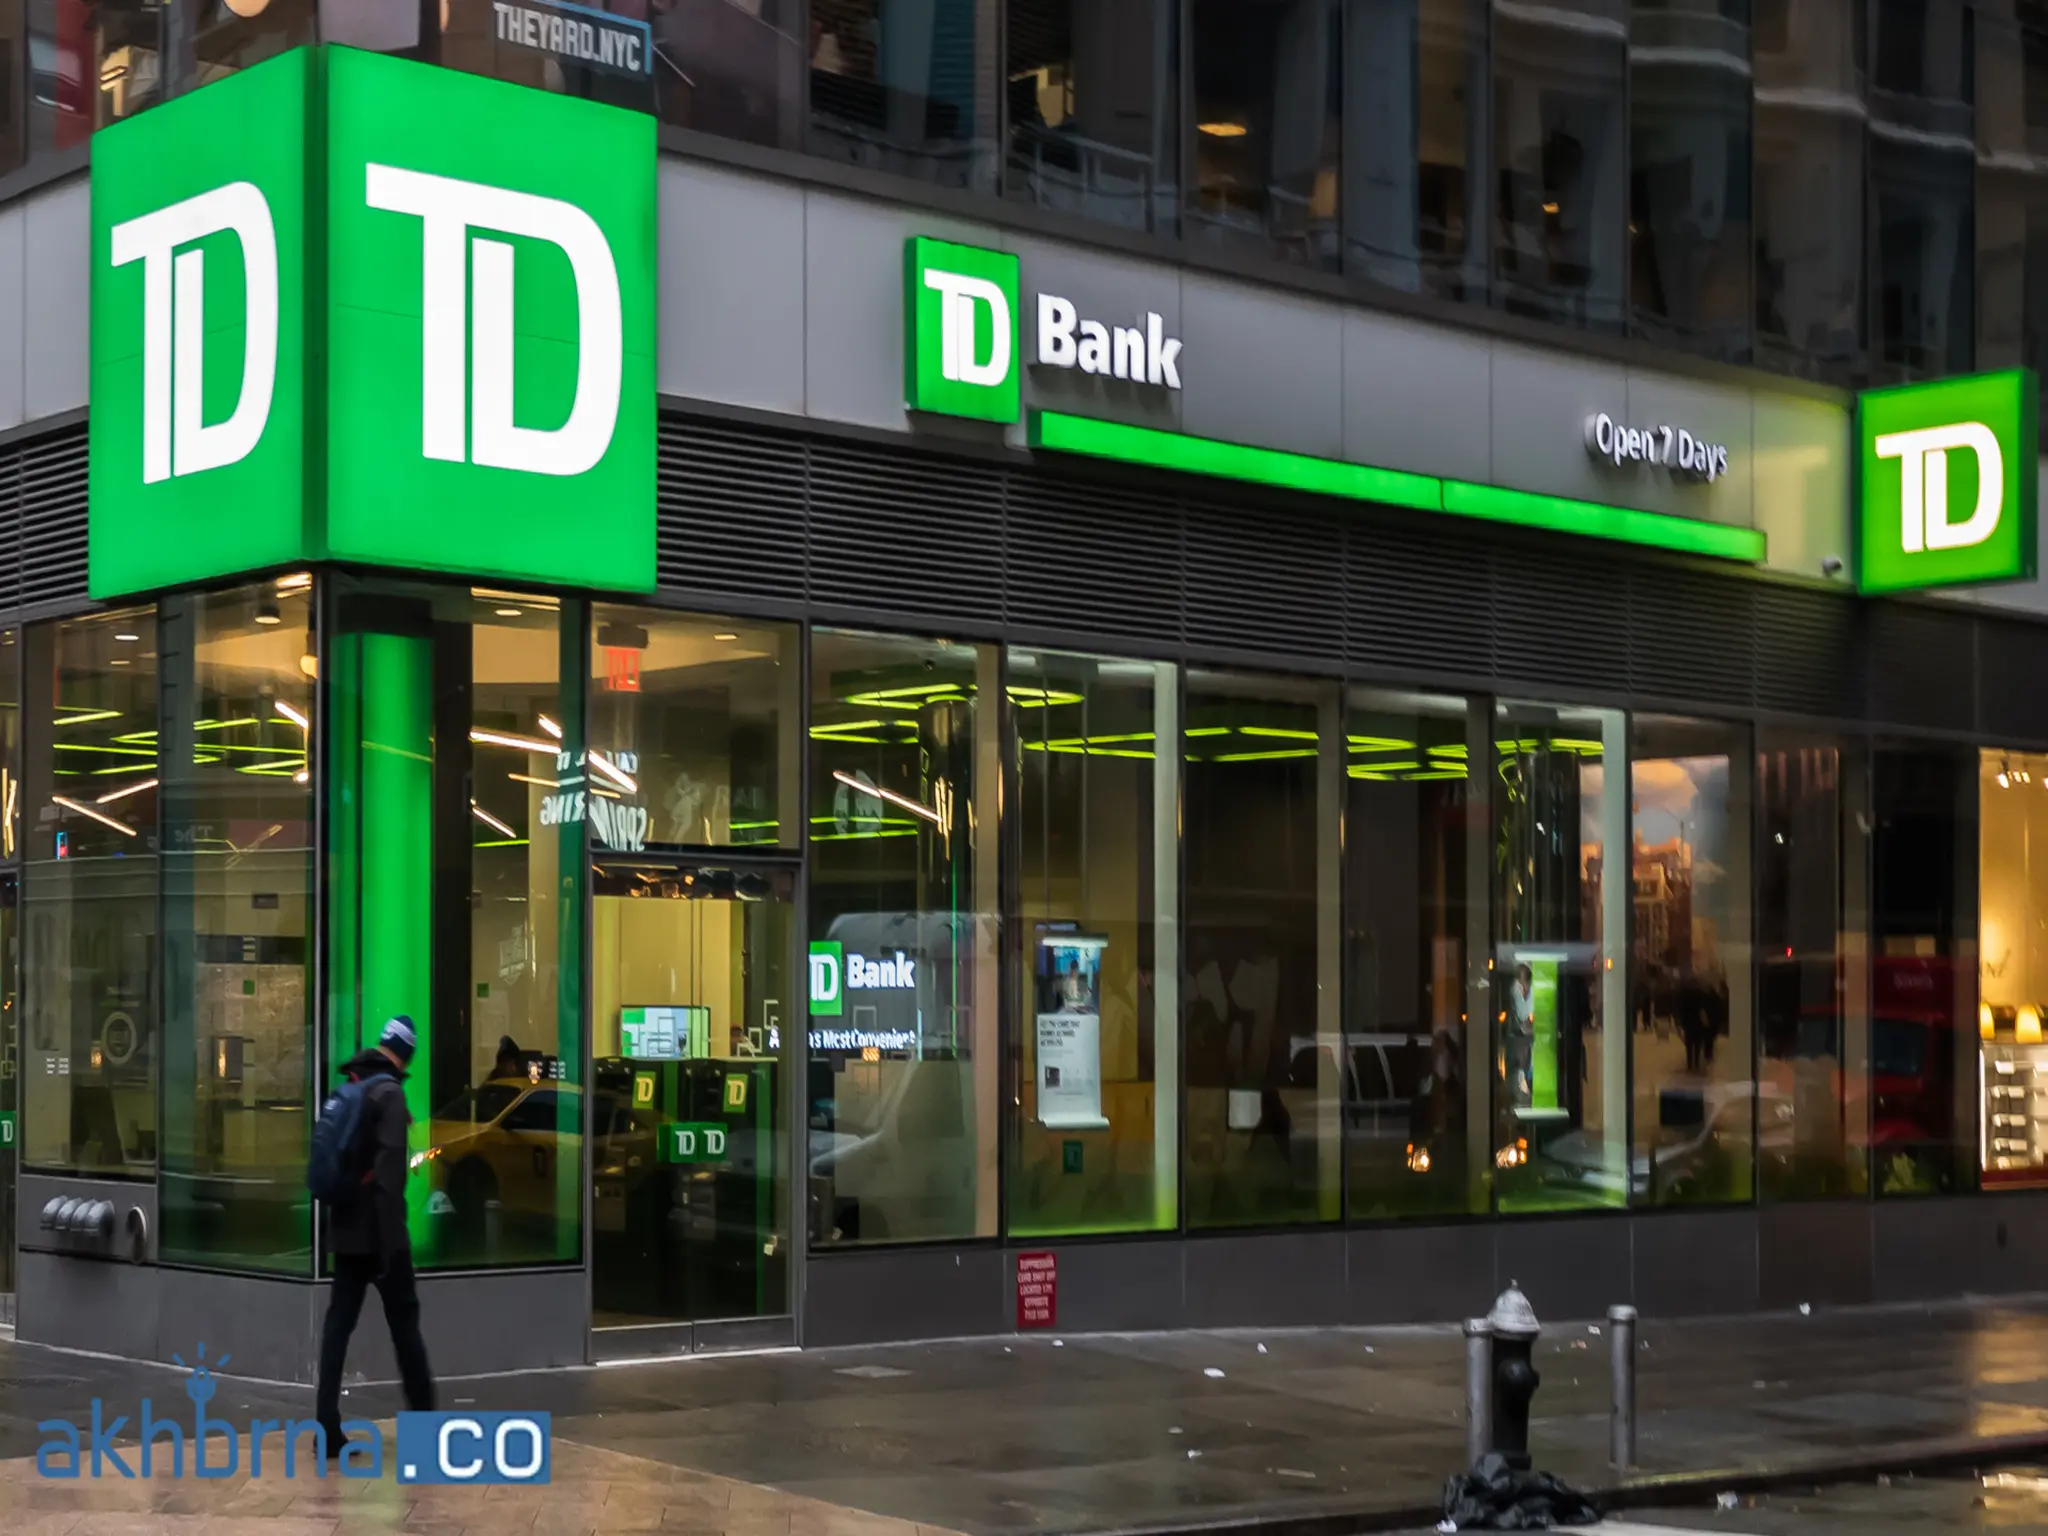 Canada: Opt-Out Deadline Approaching for TD Bank Customers in $15.9M Settlement